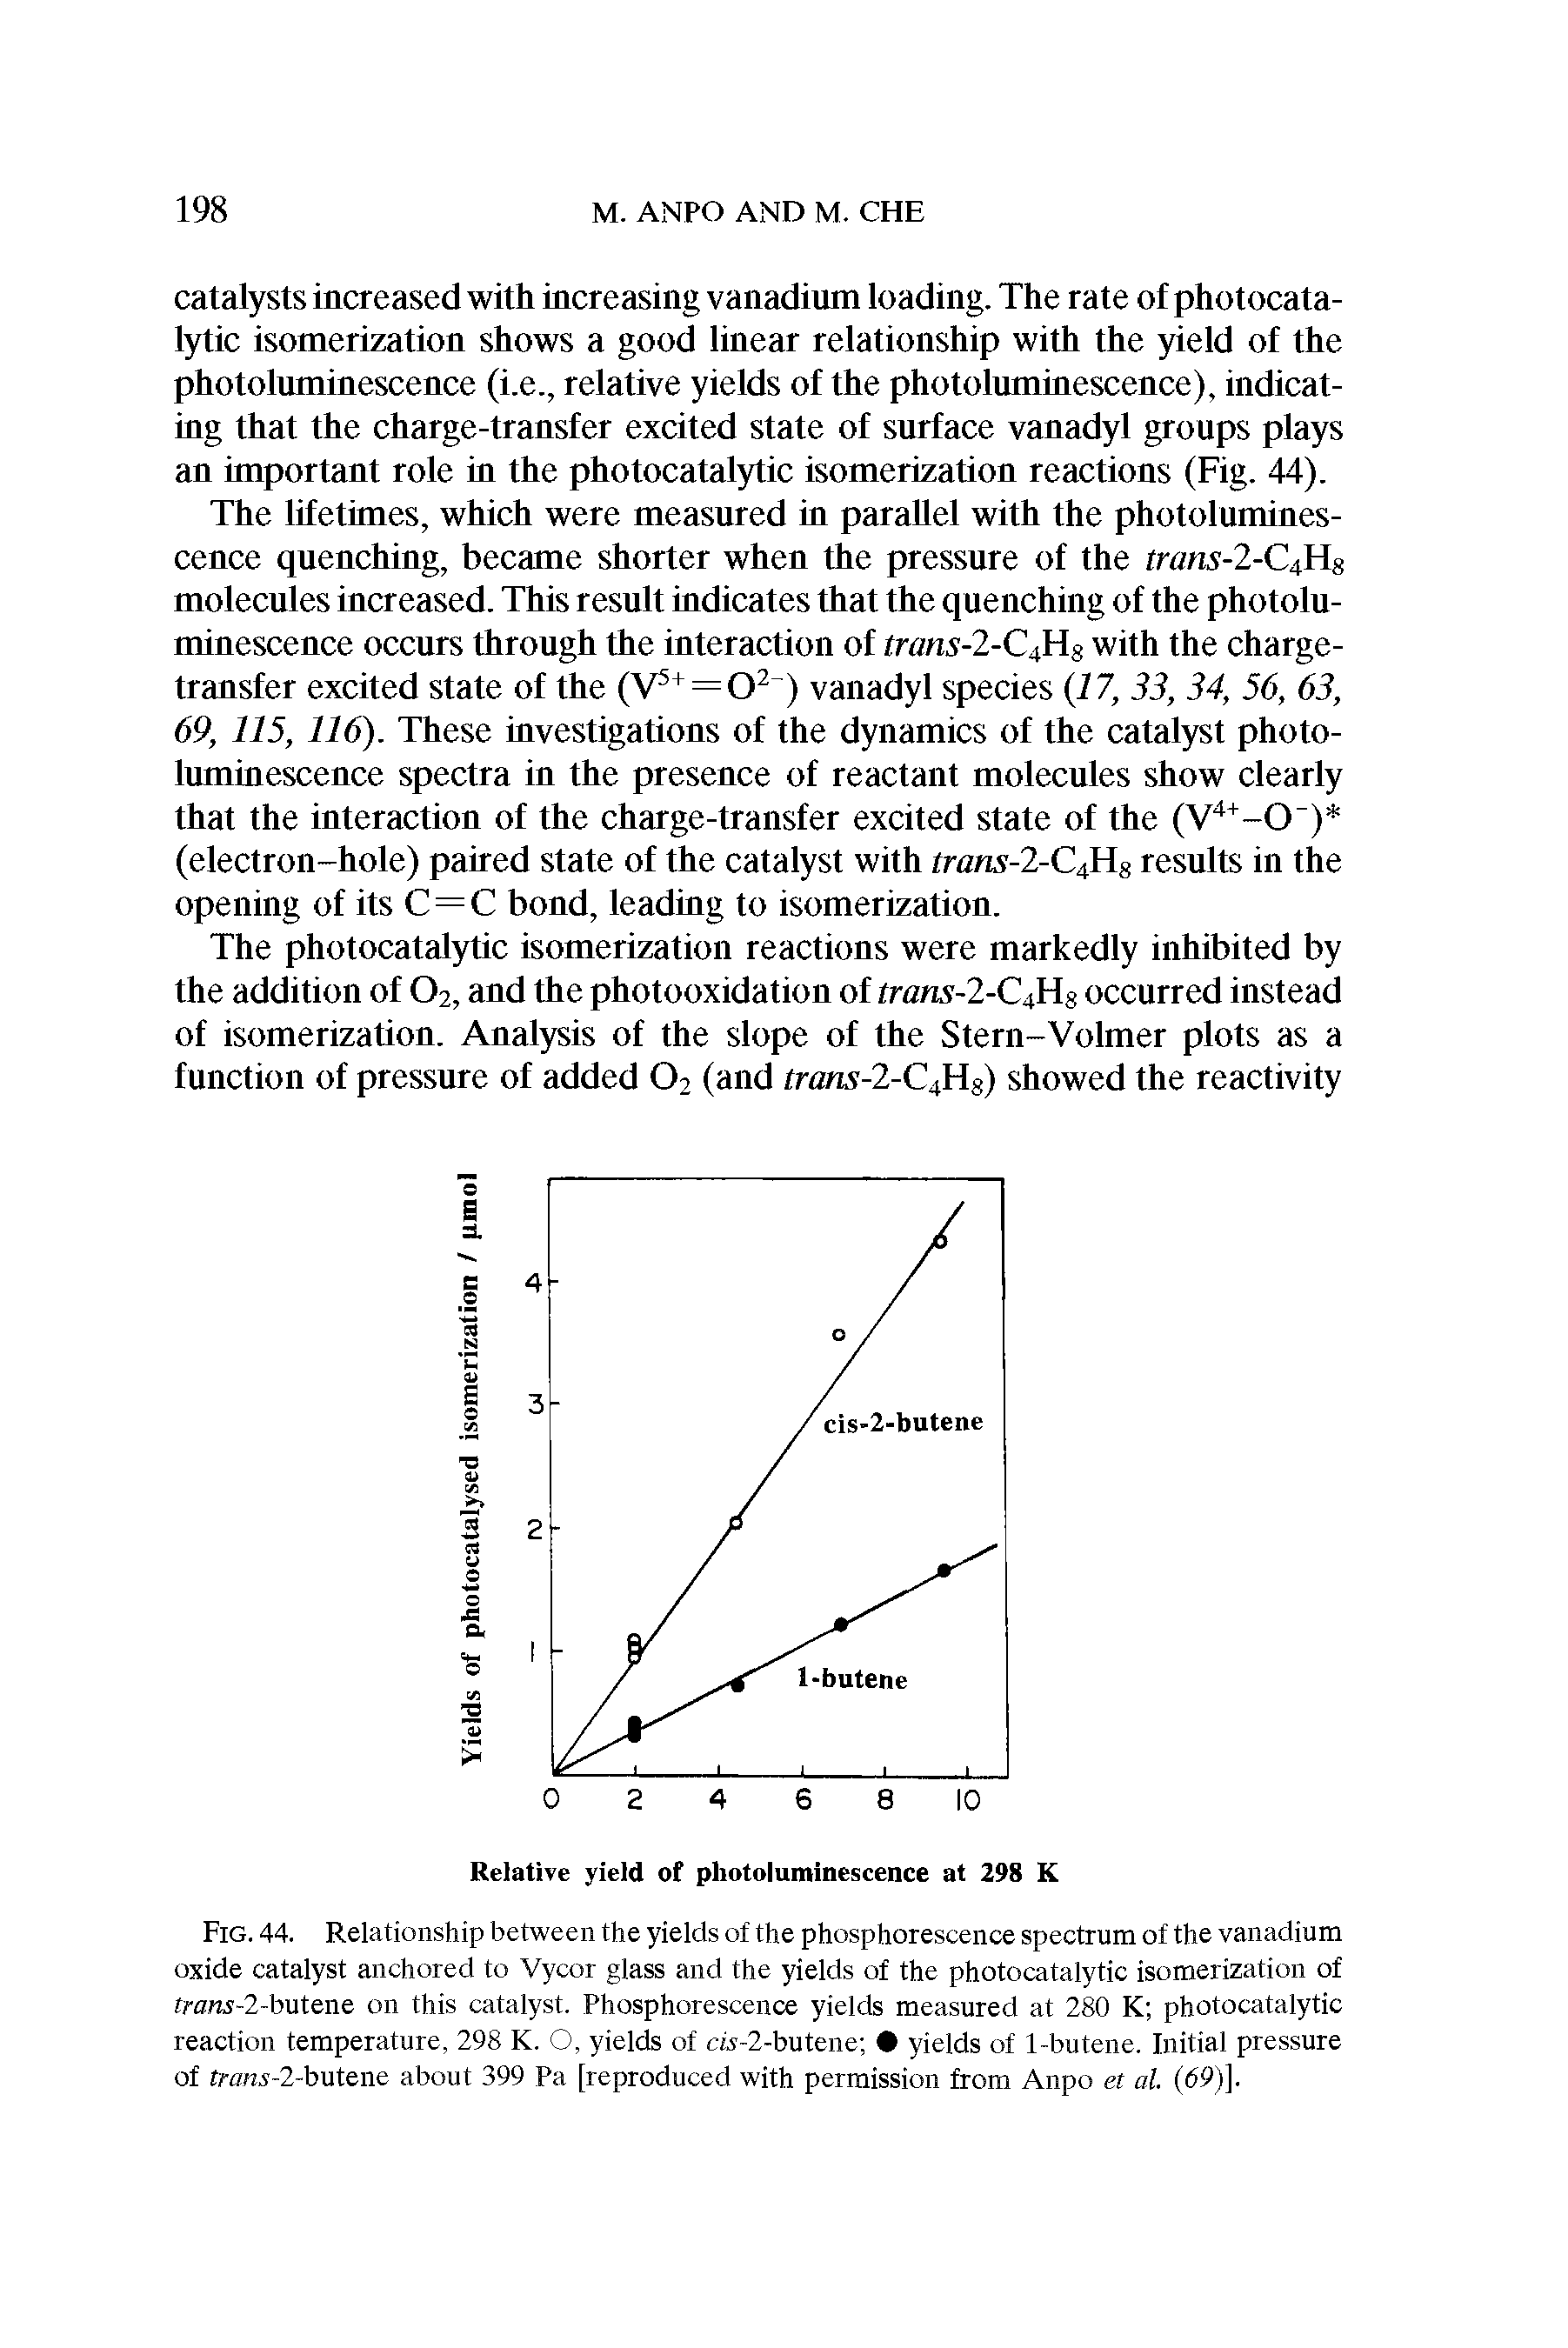 Fig. 44. Relationship between the yields of the phosphorescence spectrum of the vanadium oxide catalyst anchored to Vycor glass and the yields of the photocatalytic isomerization of tTOra-2-butene on this catalyst. Phosphorescence yields measured at 280 K photocatalytic reaction temperature, 298 K. O, yields of cw-2-butene yields of 1-butene. Initial pressure of rranj-2-buteiie about 399 Pa [reproduced with permission from Anpo et at (69)].